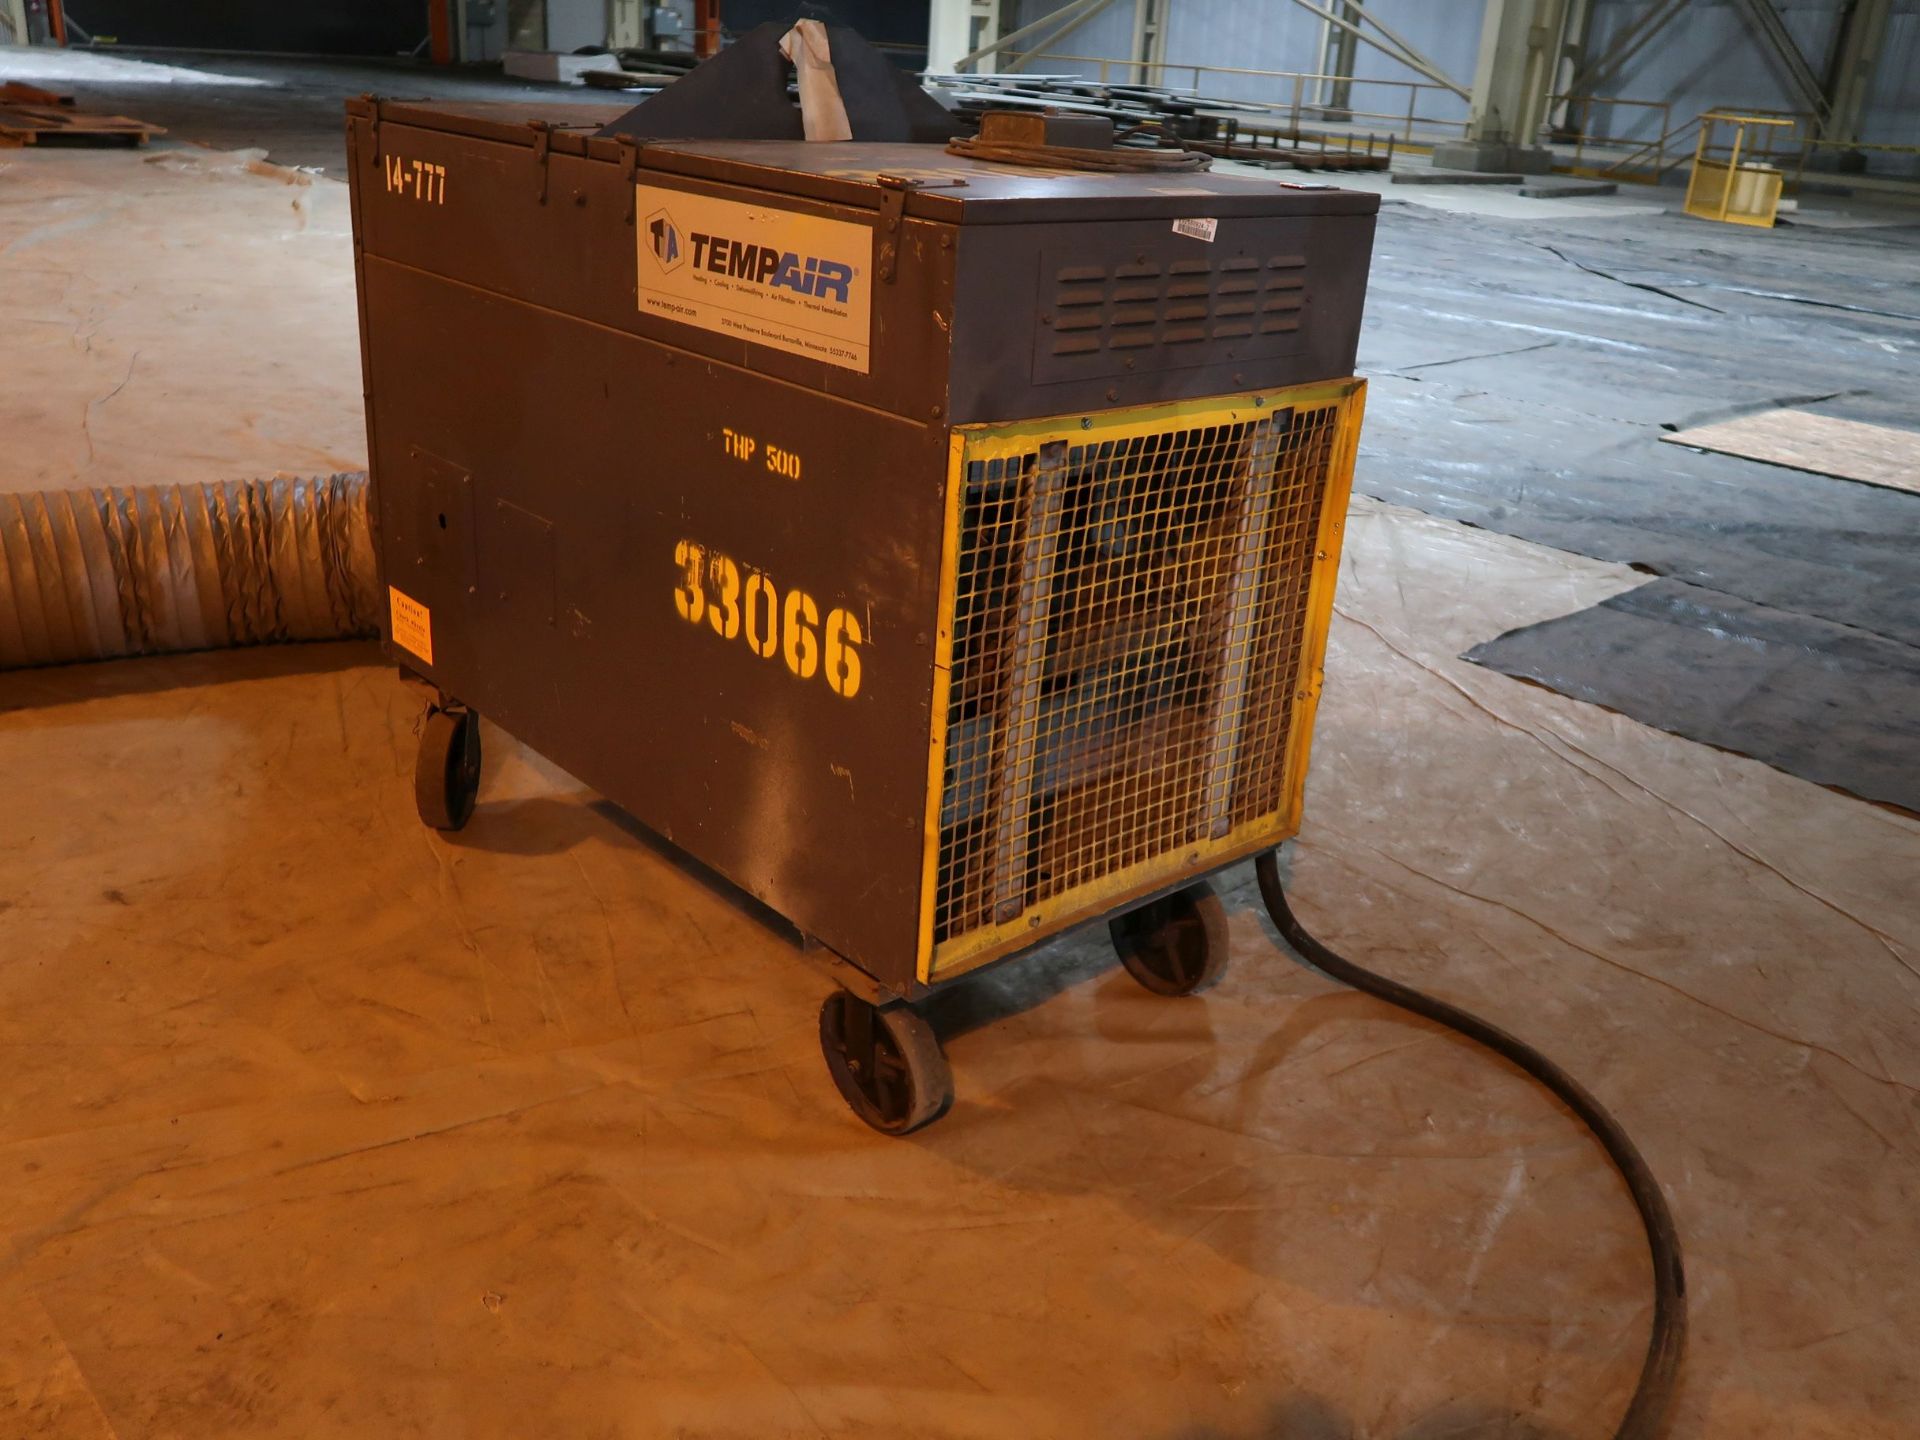 TEMP AIR MODEL THP-500A PORTABLE NATURAL GAS FIRED, FRESH AIR HEATER; S/N 33066, THERMOSTAT CONTROL - Image 3 of 6